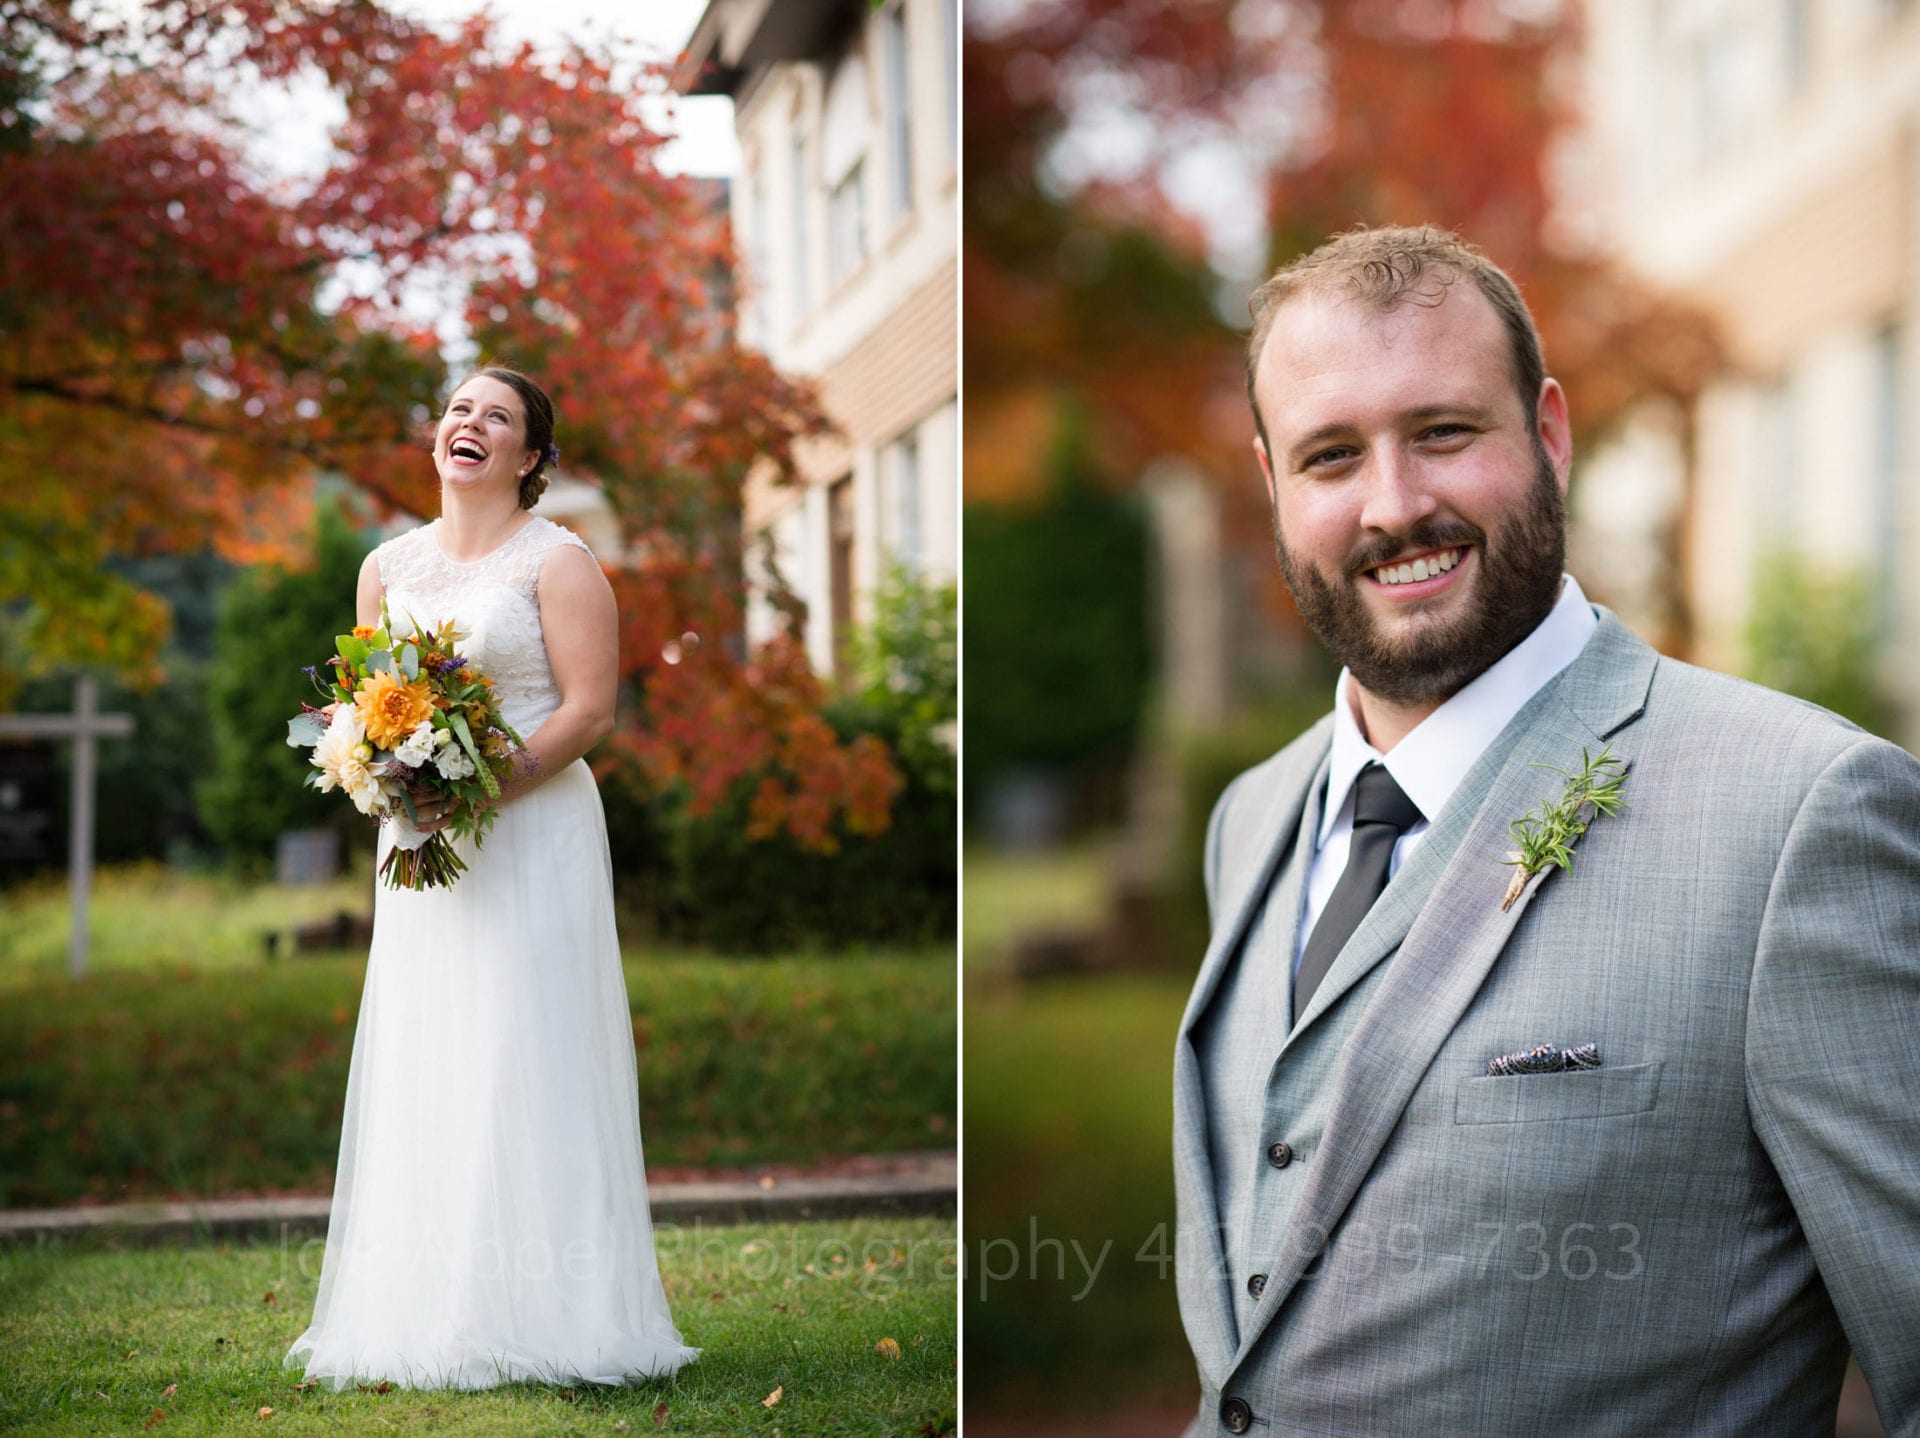 Individual portraits of a bride and groom stand outside with a red-leafed tree behind them.